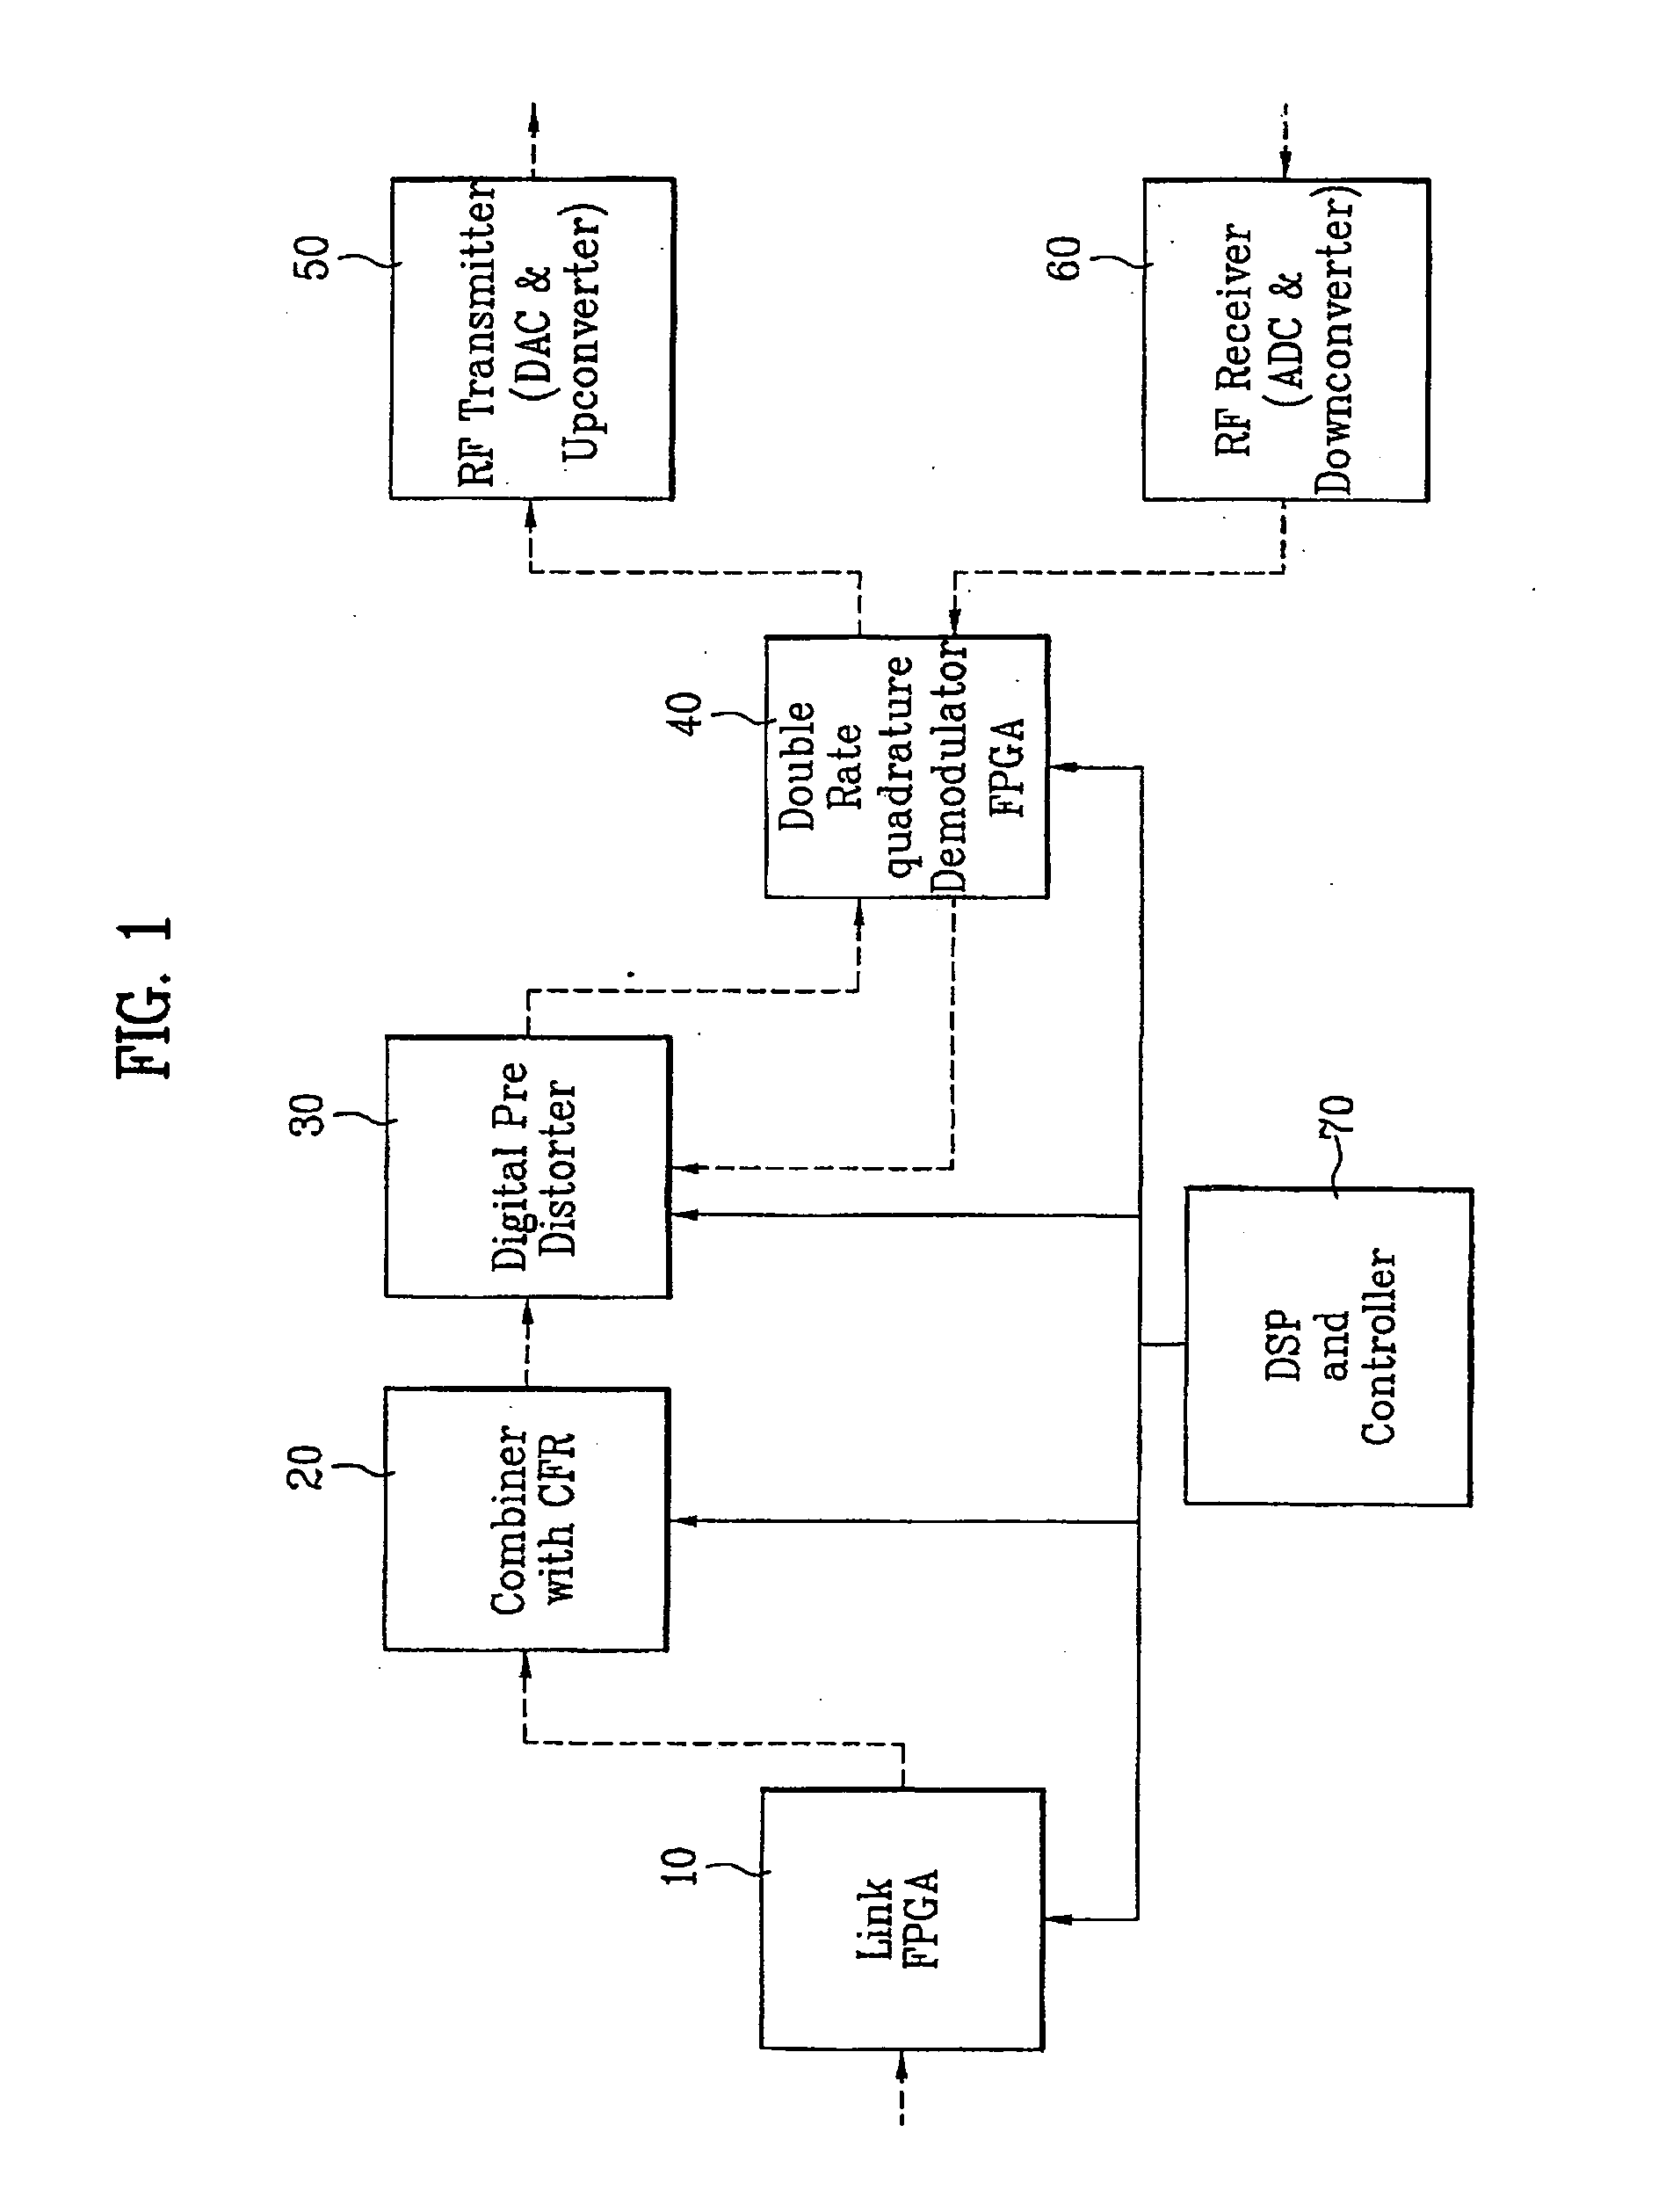 Method and apparatus for enhancing the call access rate in a communication system